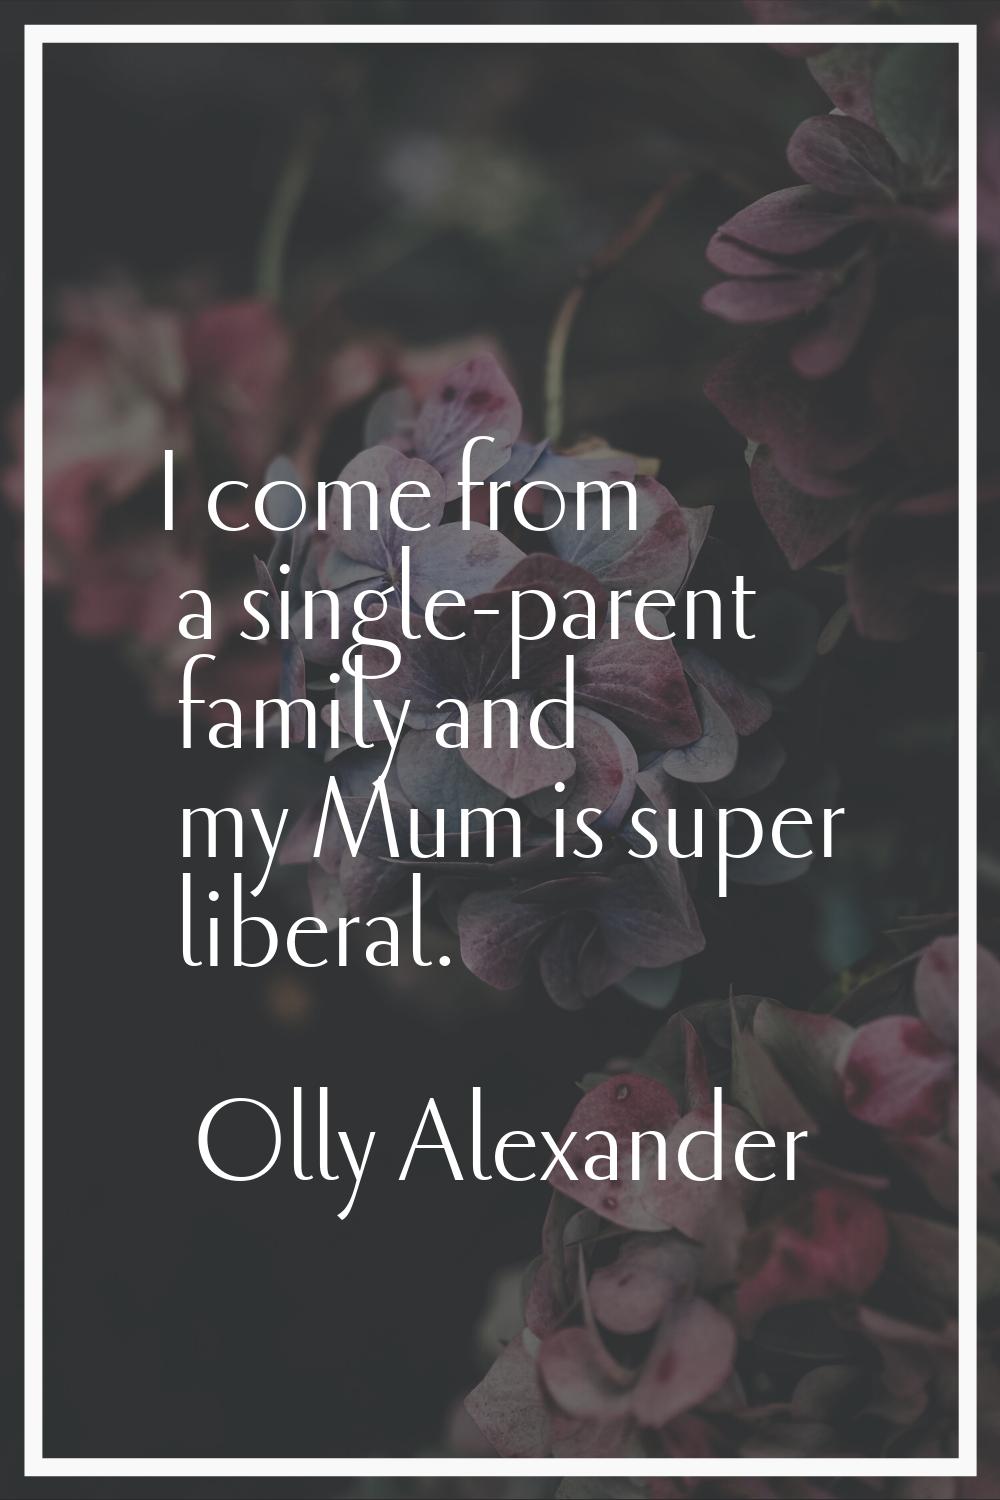 I come from a single-parent family and my Mum is super liberal.